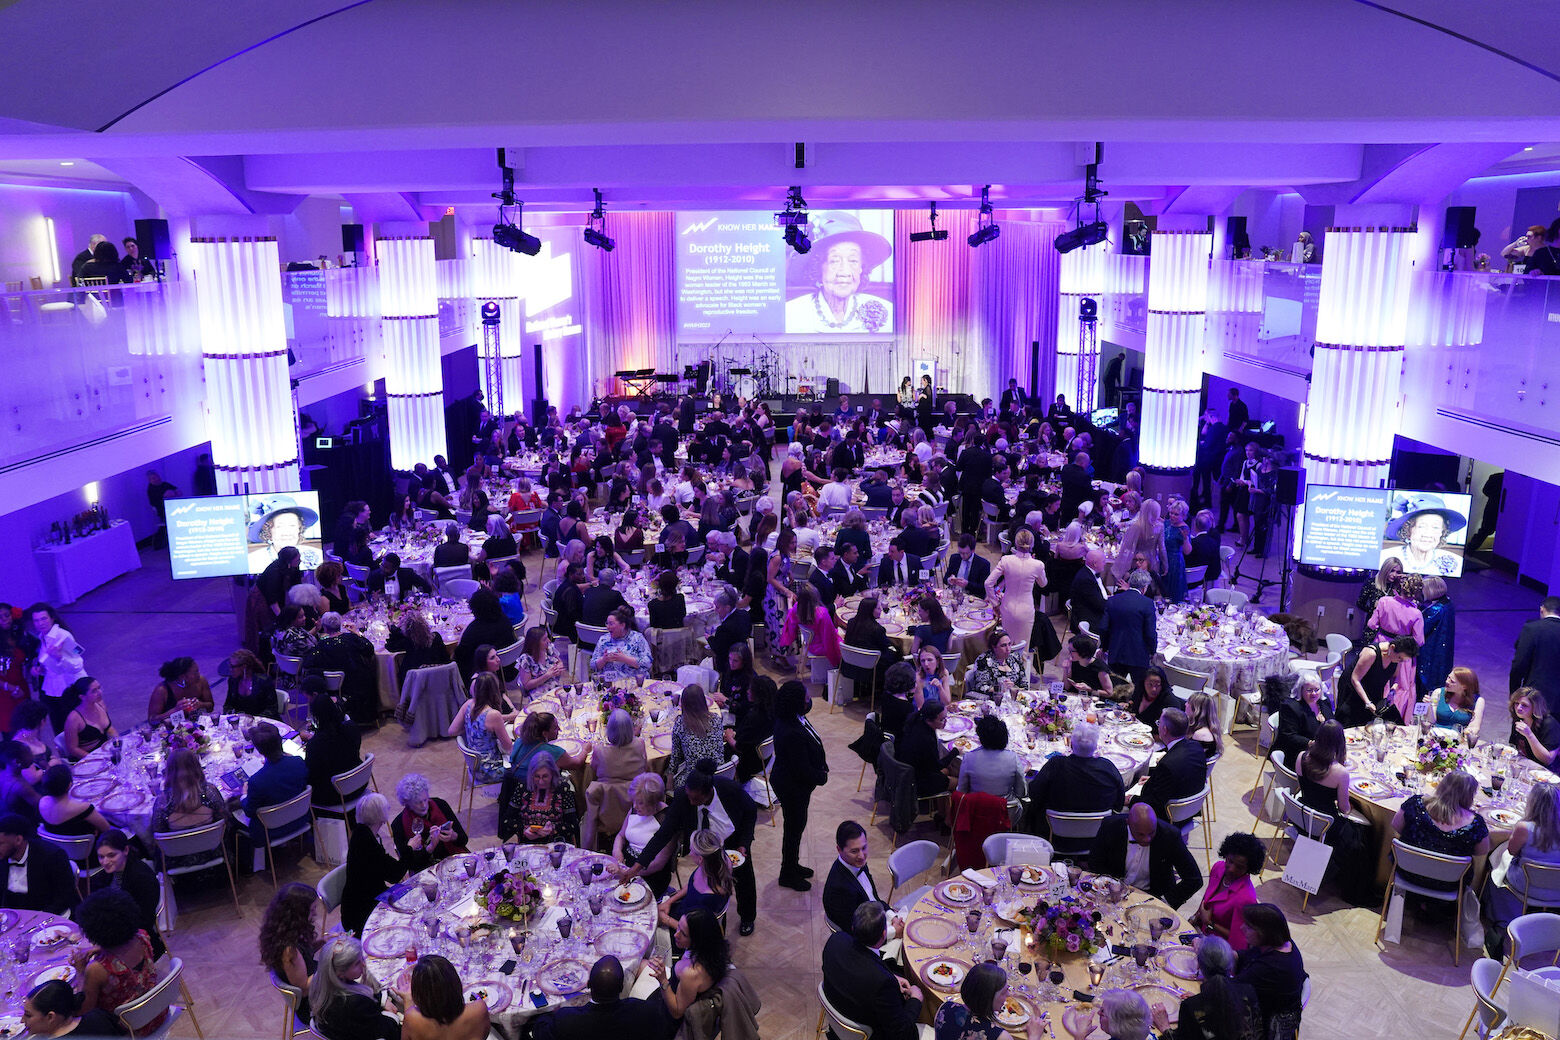 WASHINGTON, DC - MARCH 31: A wide view of dinner as guests arrive during the National Women's History Museum's signature Women Making History Awards Gala at The Schuyler at the Hamilton Hotel on March 31, 2023 in Washington, DC. (Photo by Leigh Vogel/Getty Images for National Women's History Museum )